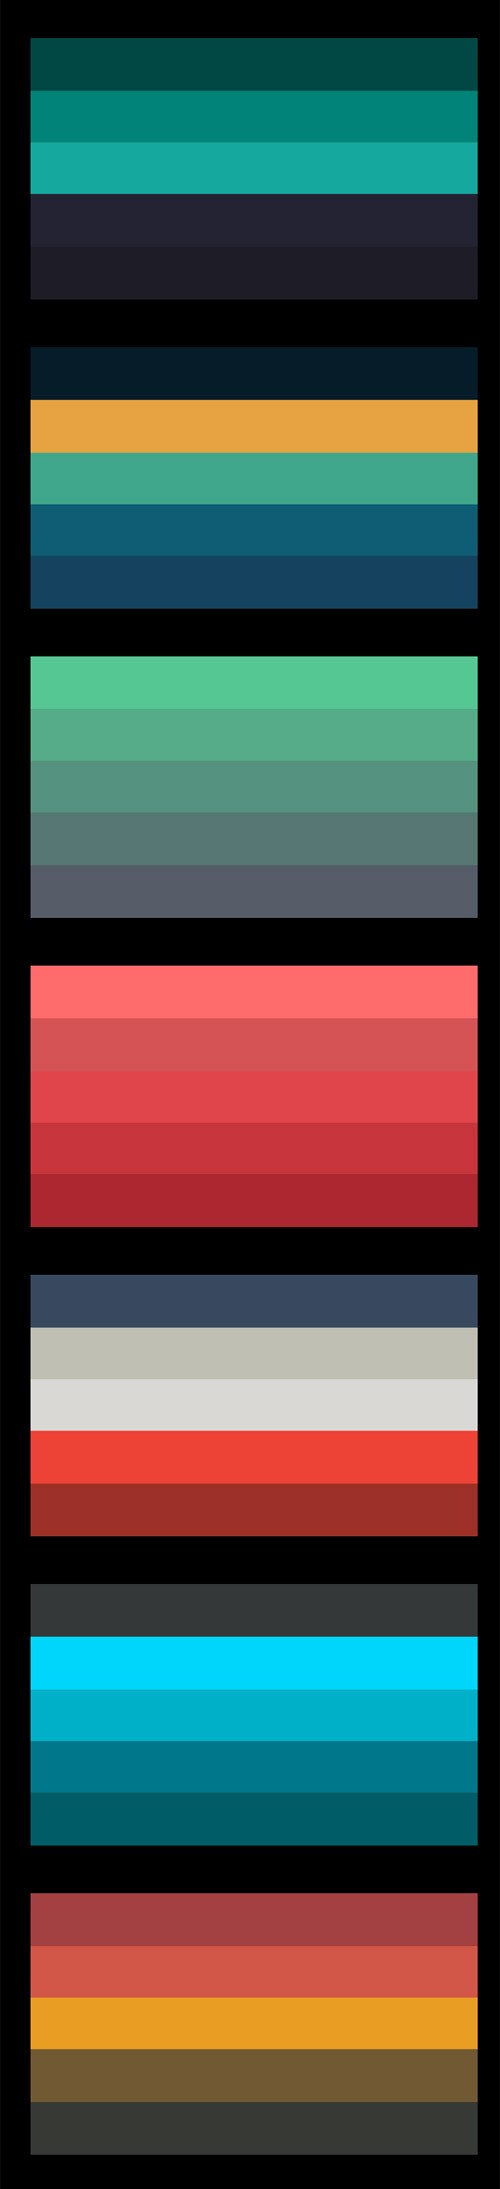 Flat-Colour-Swatches-on-Behance